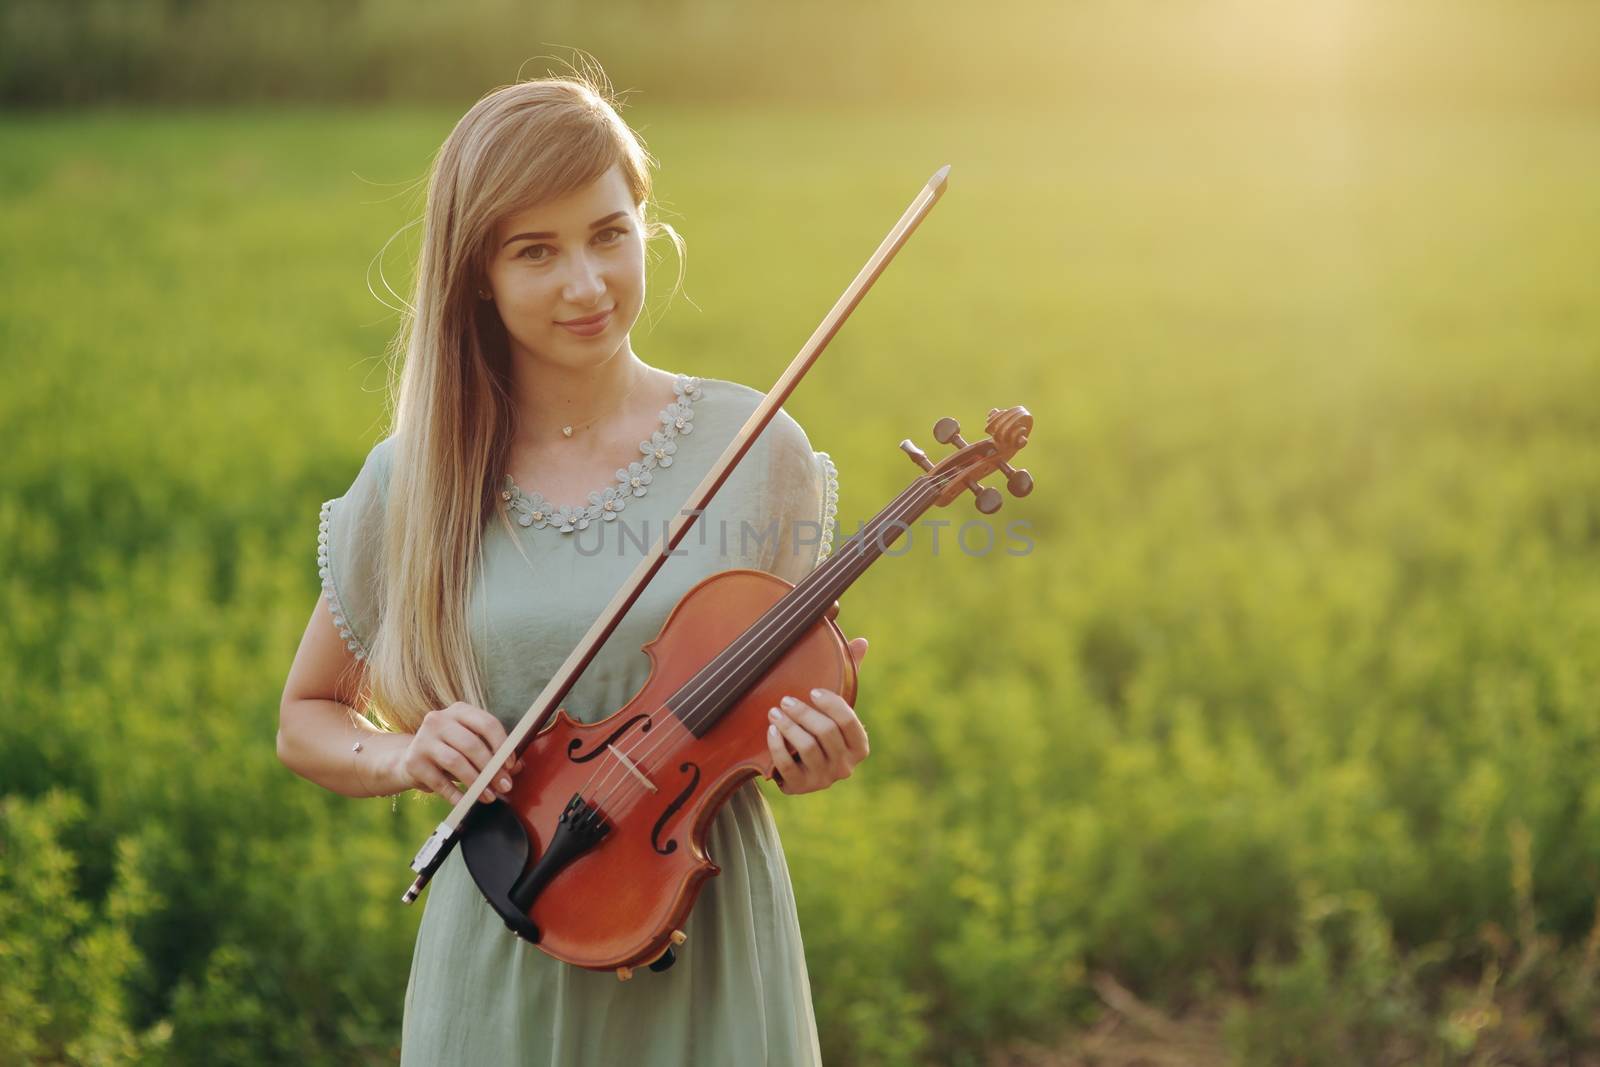 Female musician violinist holding a violin in her hands in sunset light. Violin training concept